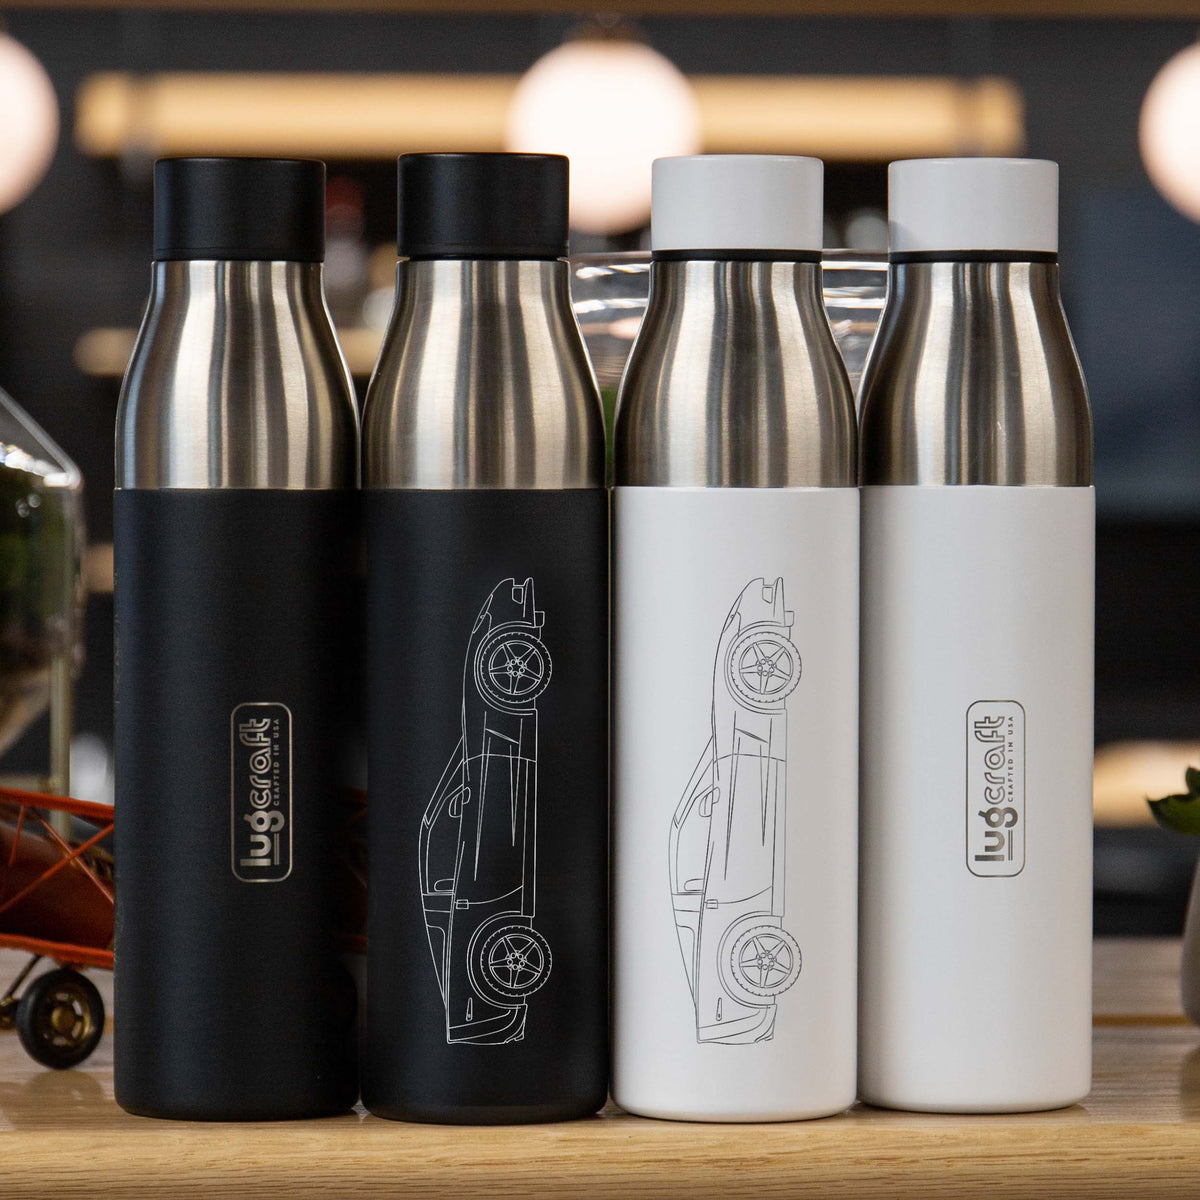 Chevy Corvette C6 Insulated Stainless Steel Water Bottle - 21 oz